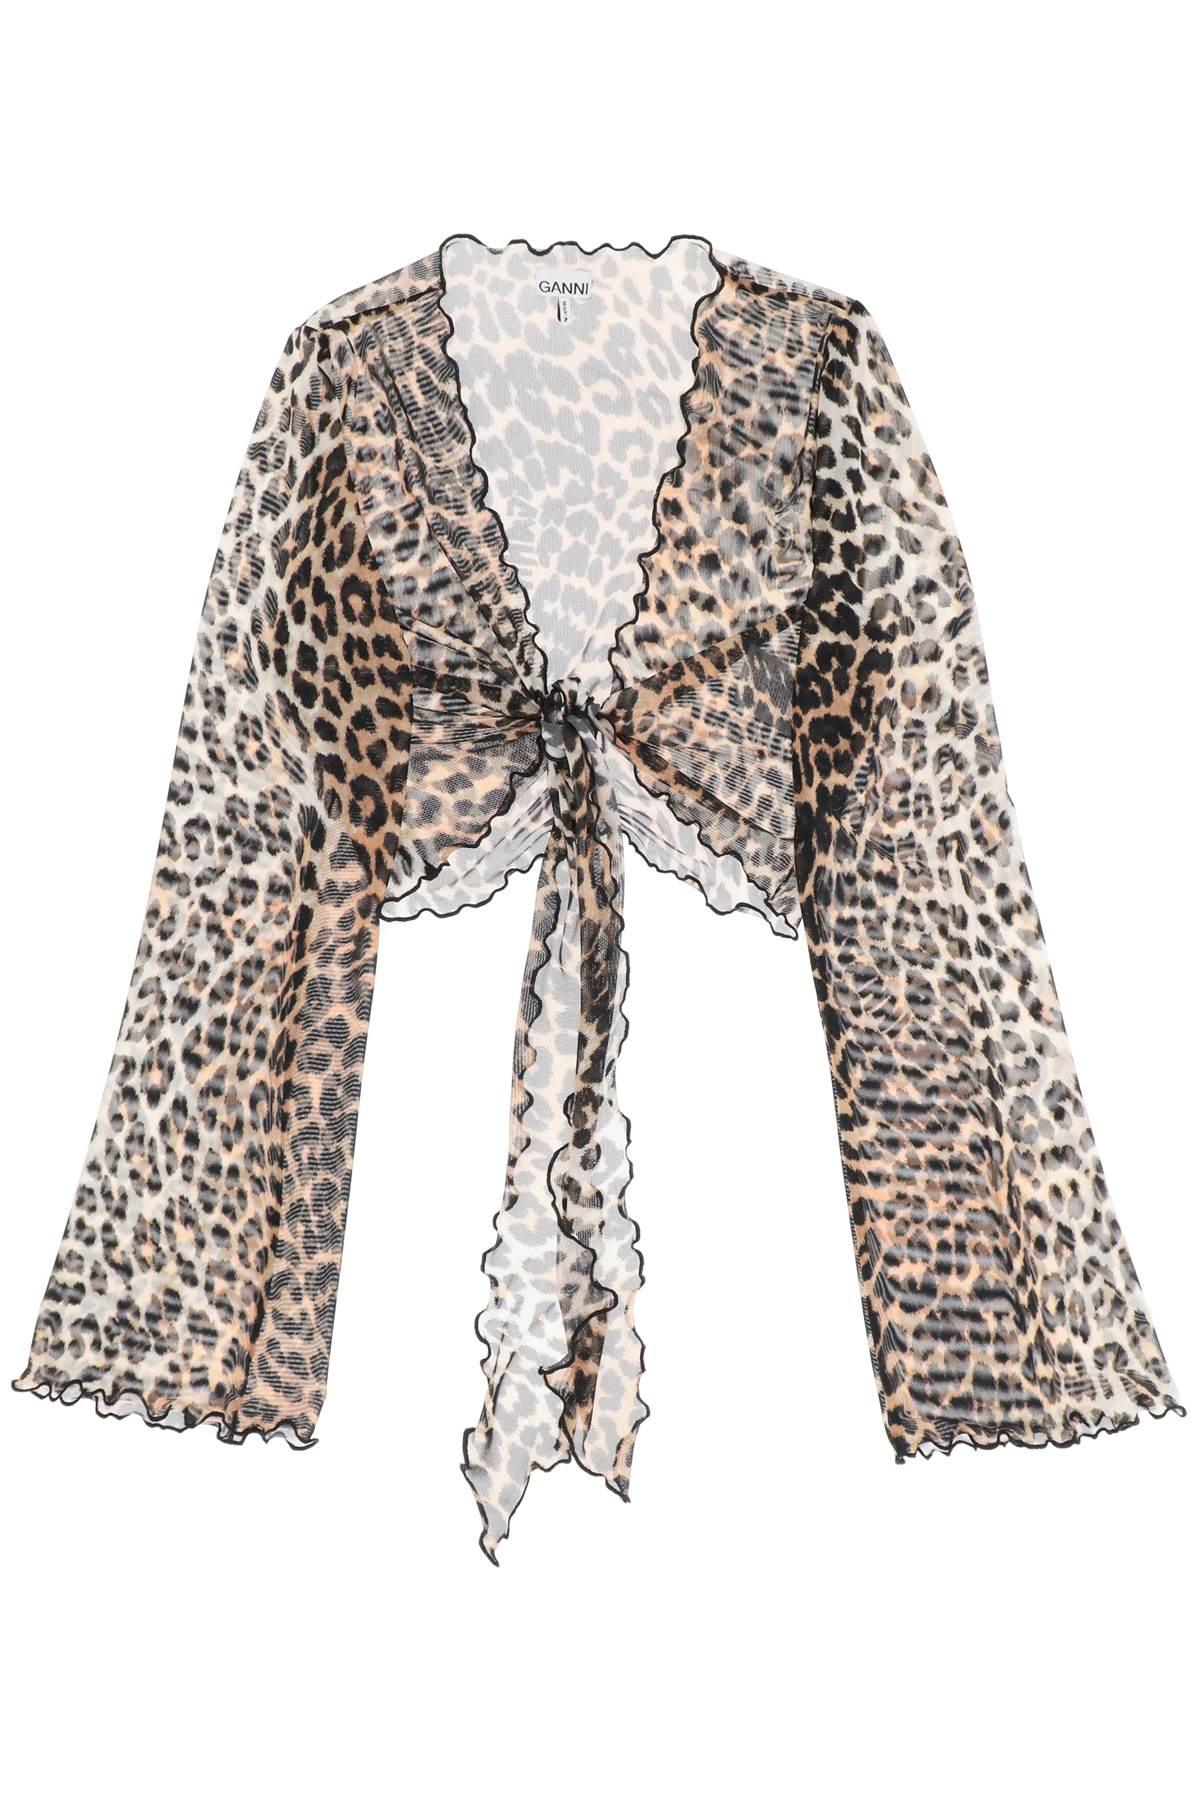 Ganni Cover Up Cropped Top In Mesh With Leopard Print - JOHN JULIA